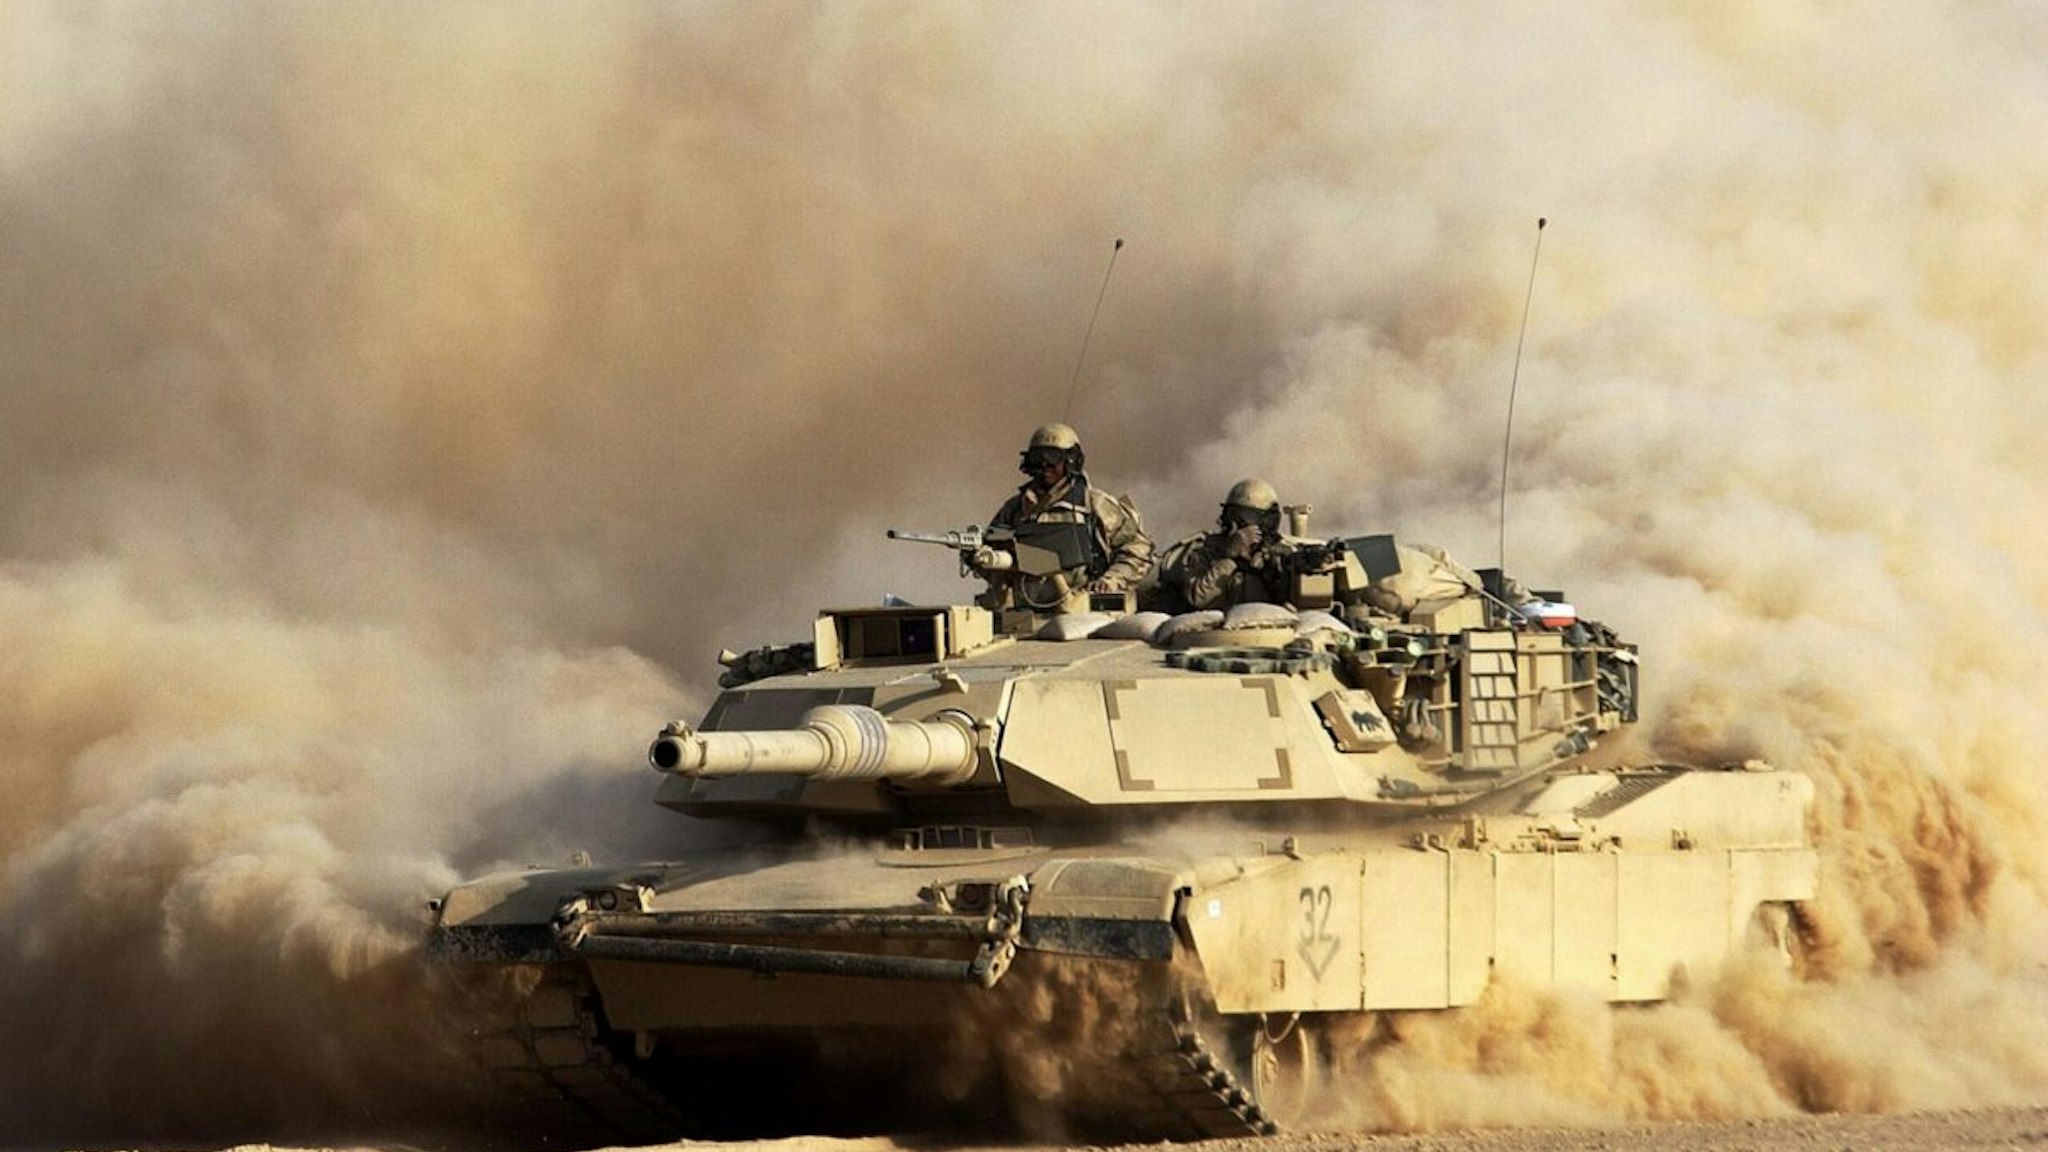 A U.S. Army 3rd Infantry Division M1/A1 Abrahms tank rolls deeper into Iraqi territory March 23, 2003 south of the city of An Najaf, Iraq. U.S. and British forces continue to assault Iraq from land, sea and air as part of the ongoing Operation Iraqi Freedom.